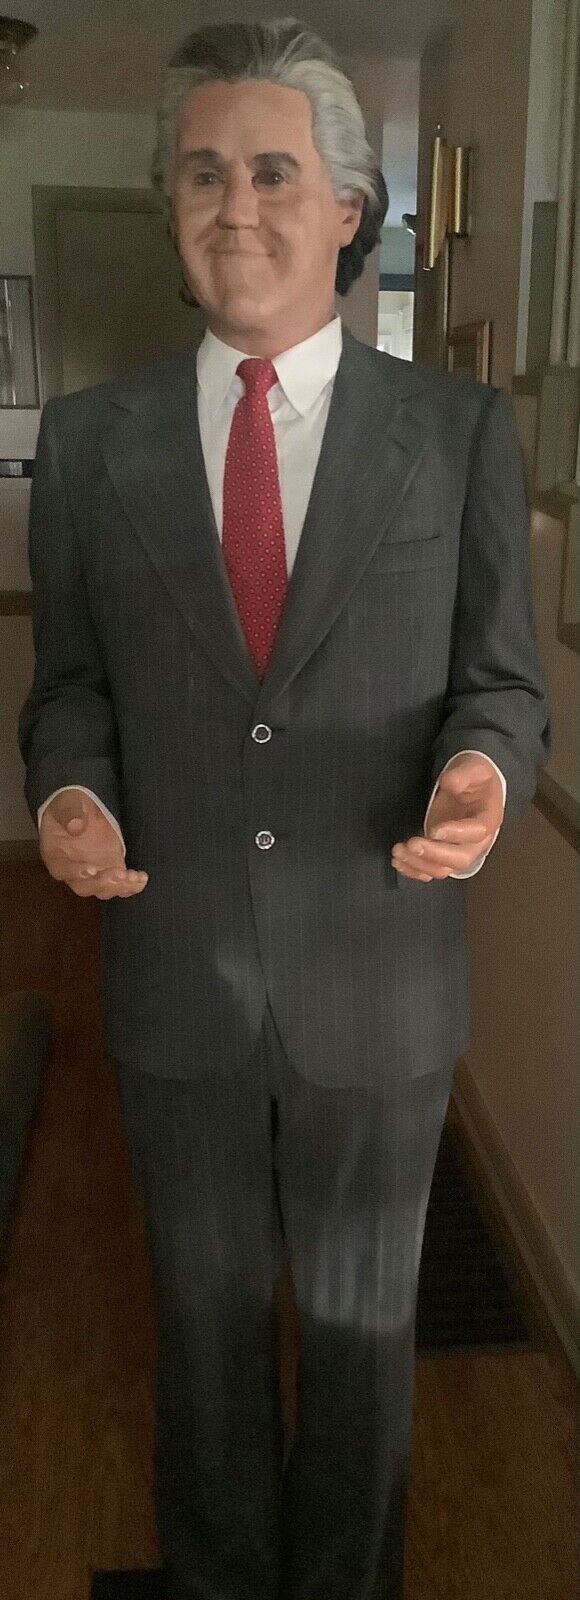 JAY LENO Wax Figure Life Size Statue from HOLLYWOOD WAX MUSEUM